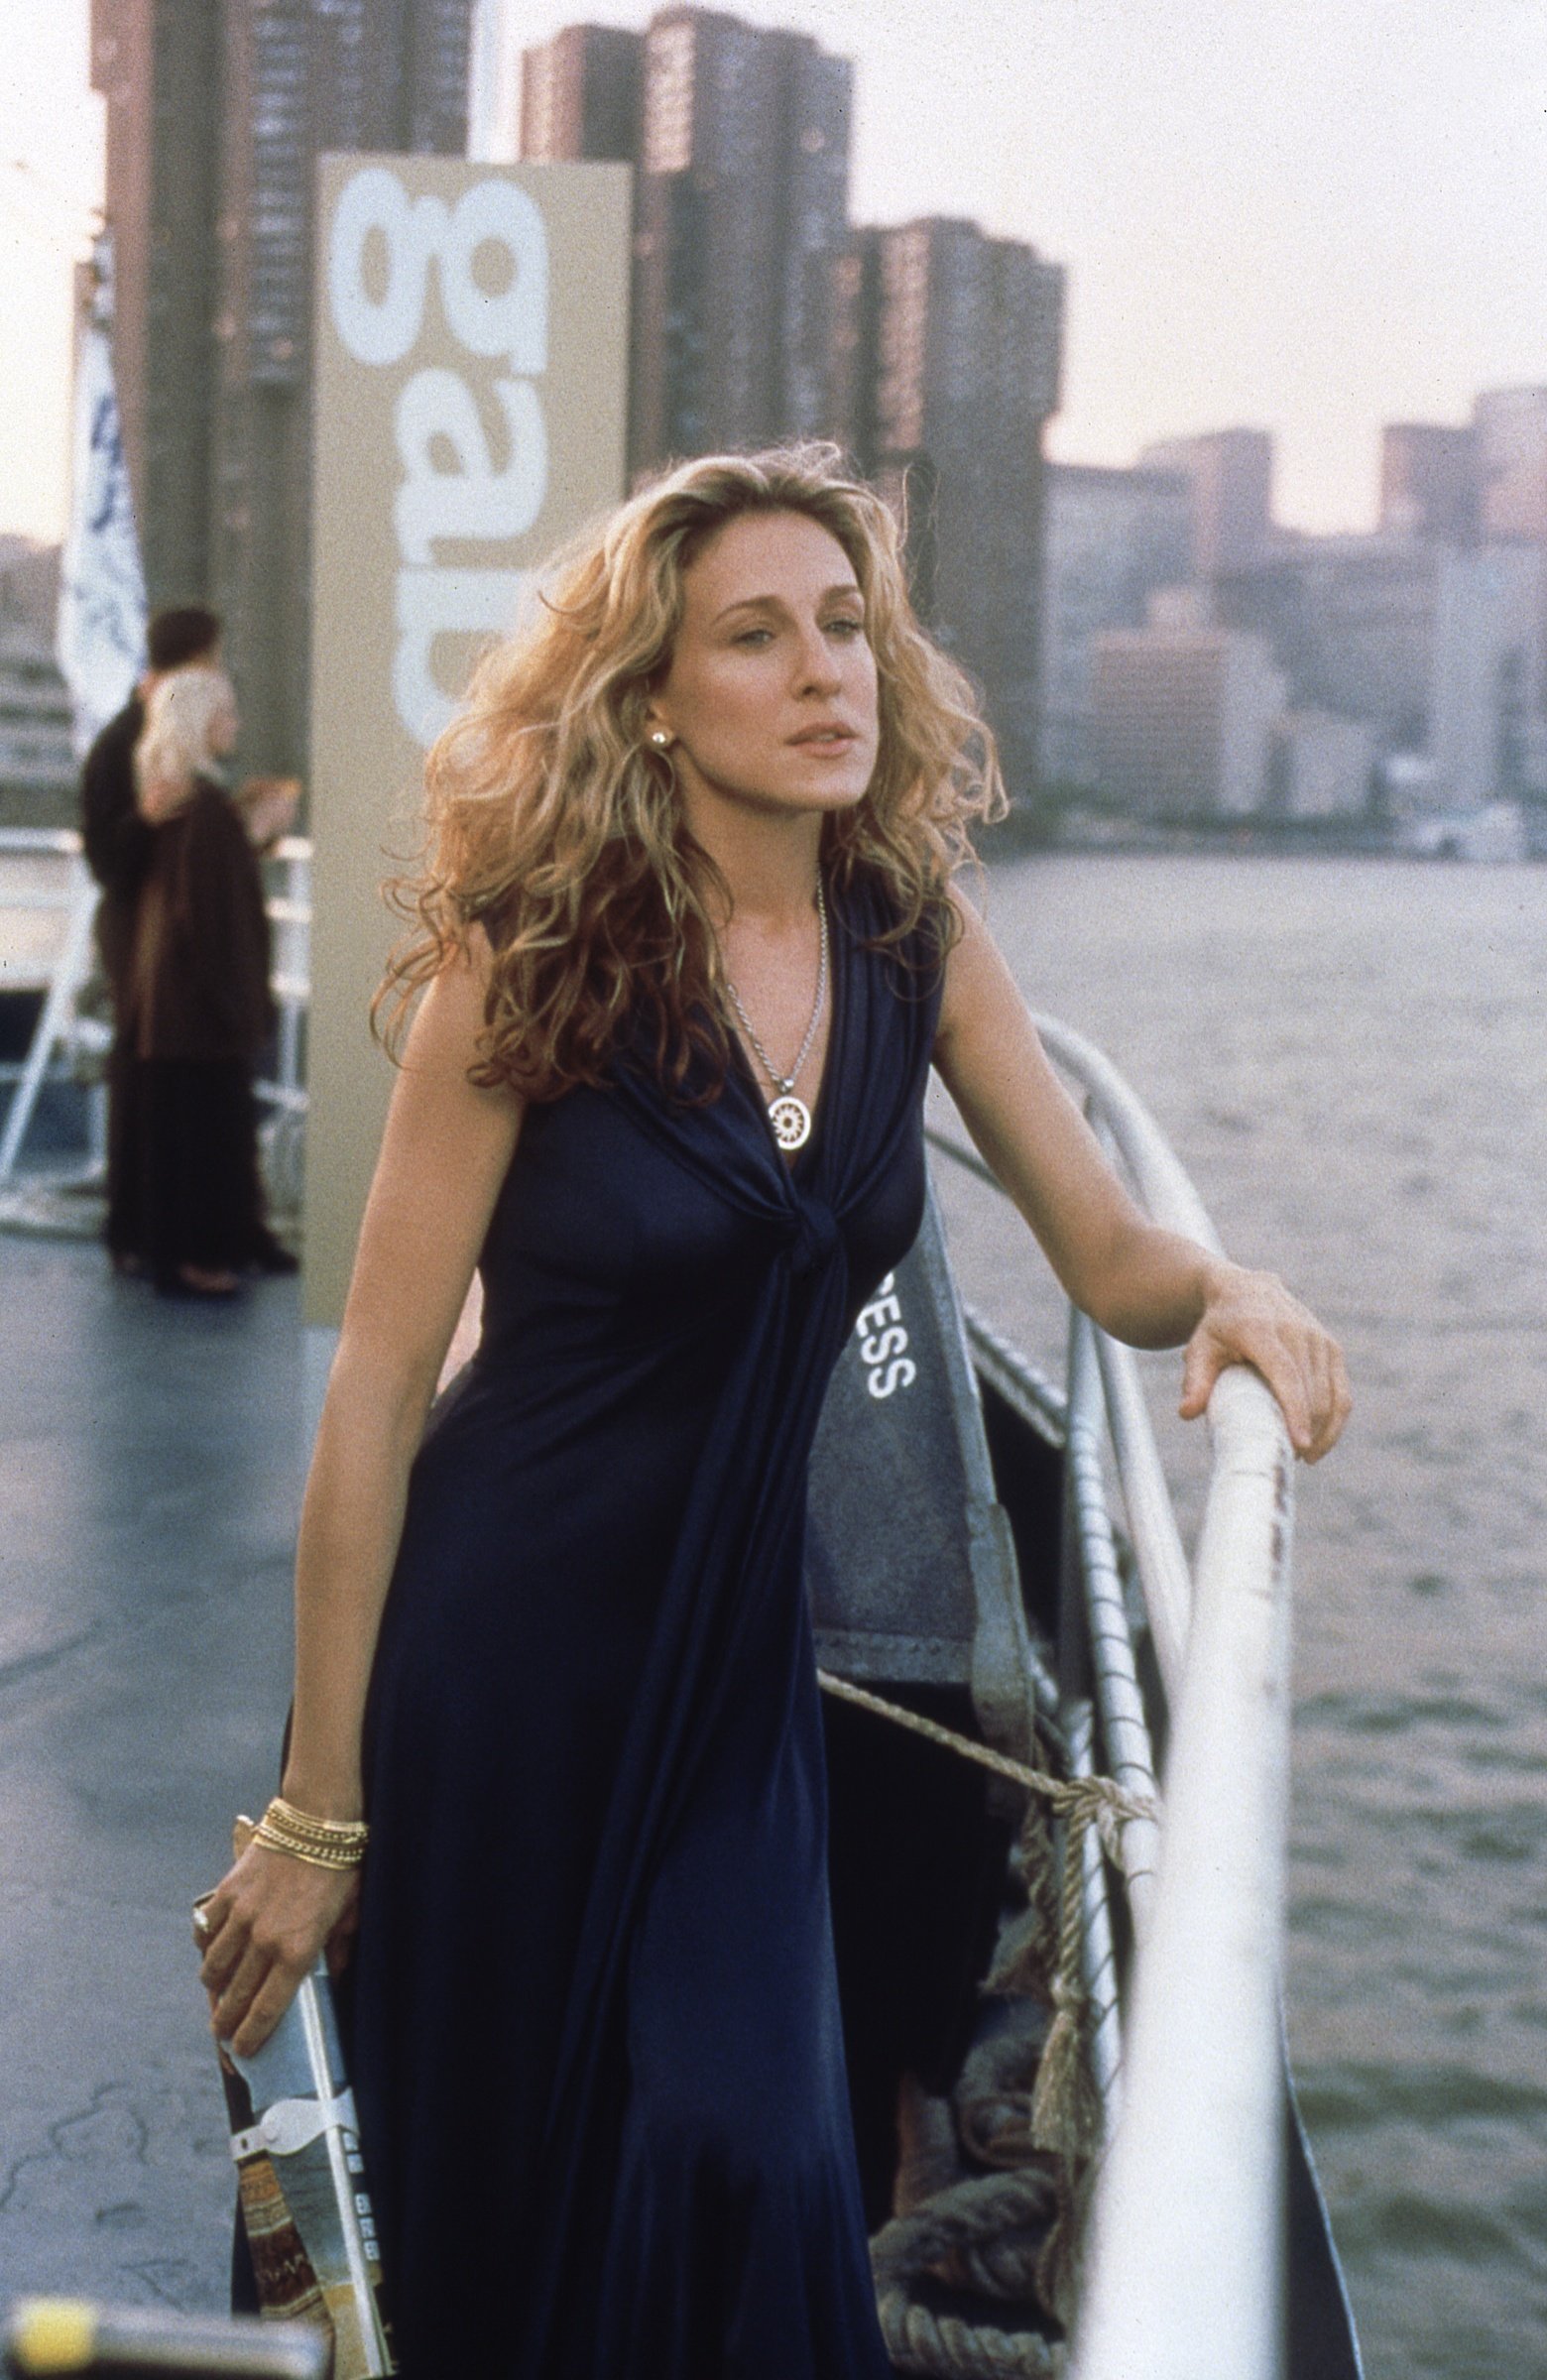 Sarah Jessica Parker as Carrie Bradshaw stands on a boat during a season 3 episode of 'Sex and the City'